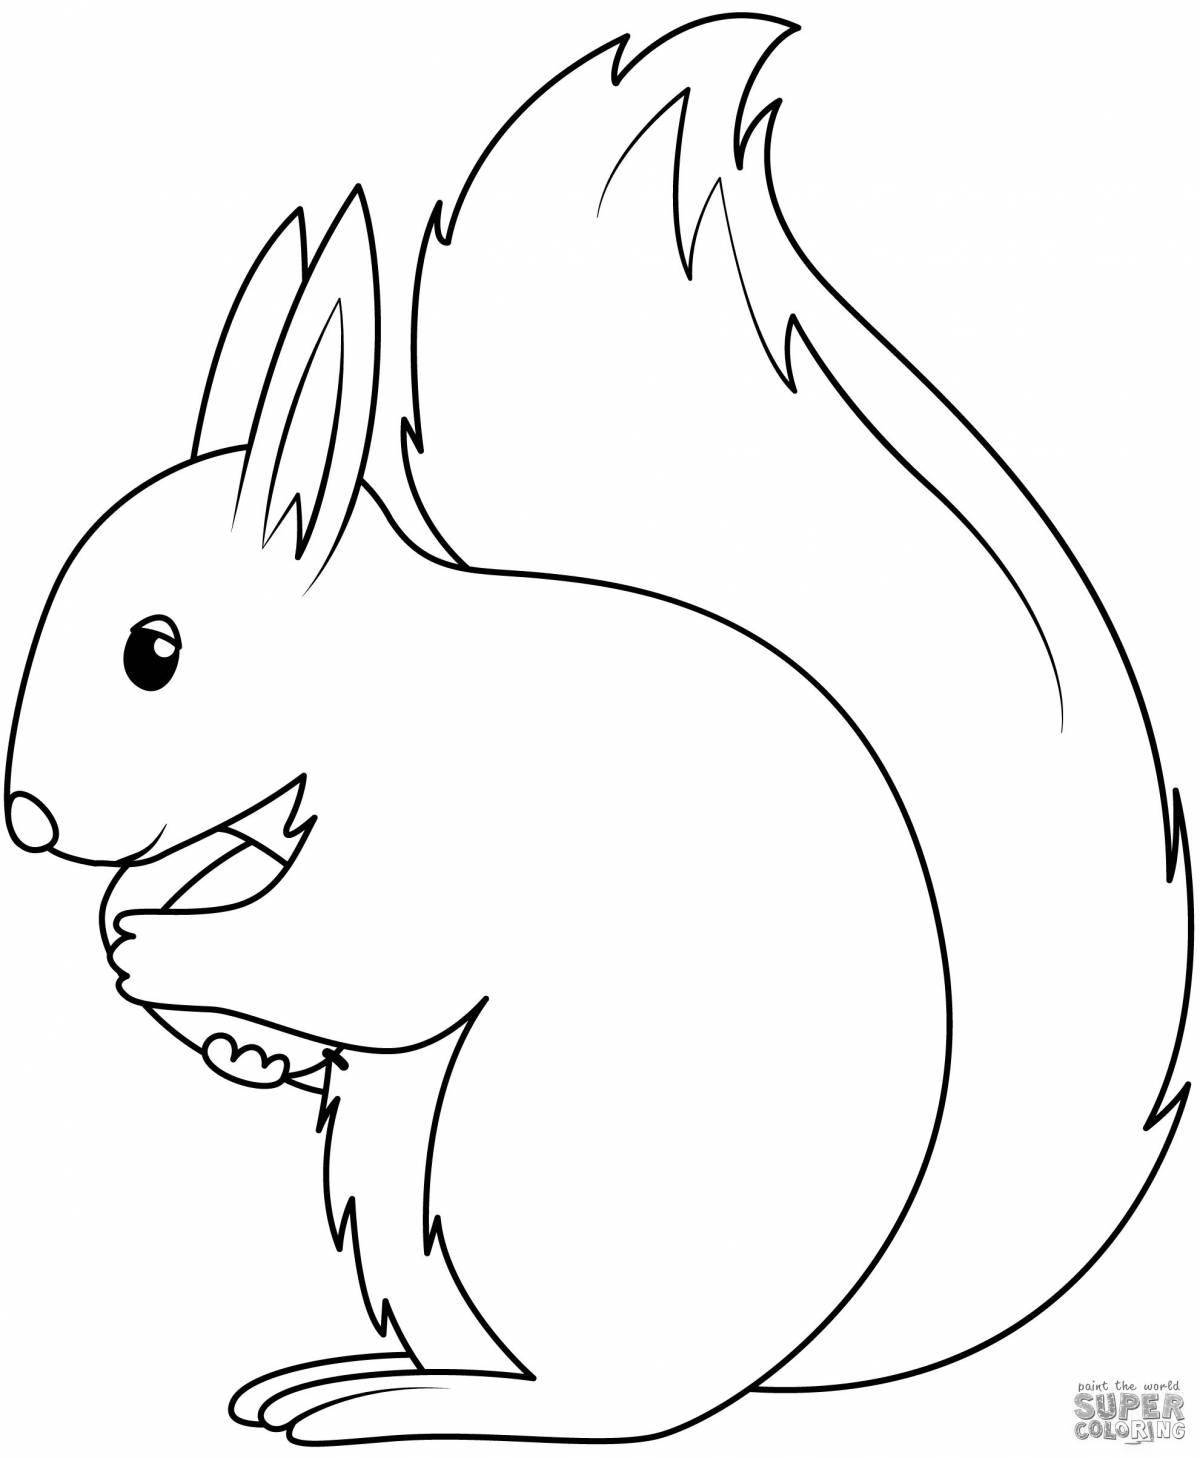 Cute squirrel coloring book for 2-3 year olds